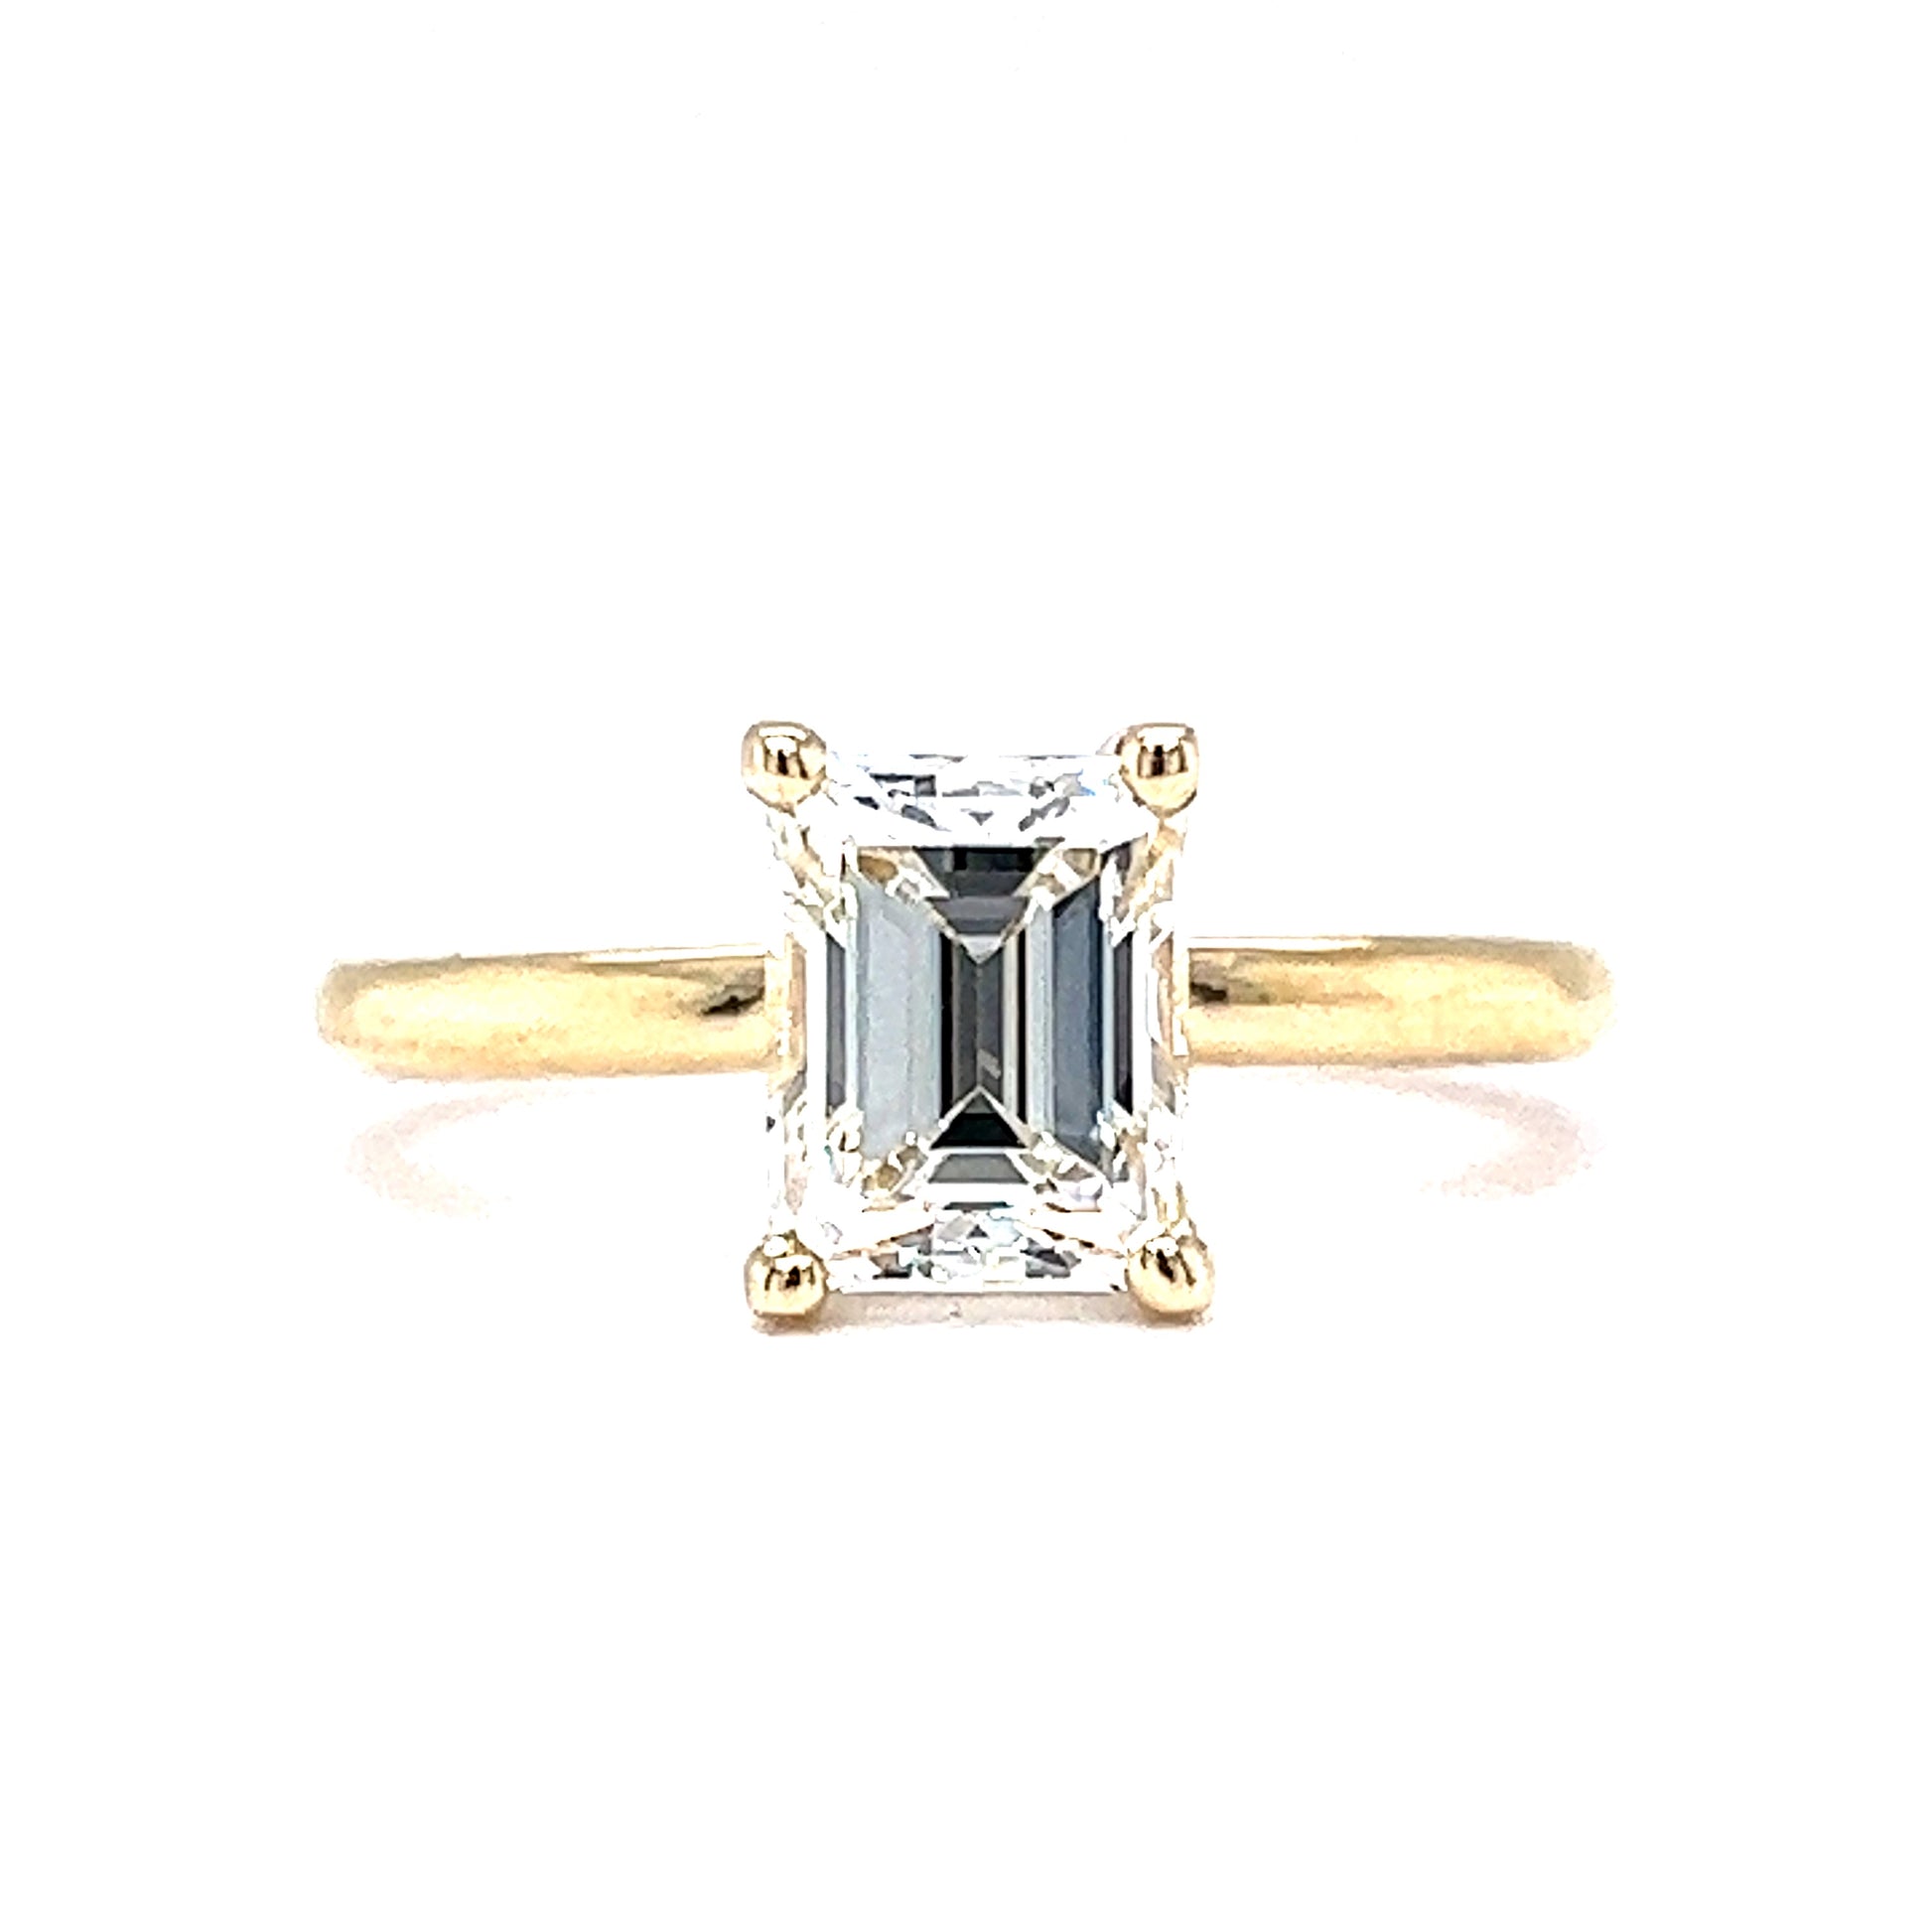 1.61 Emerald Cut Diamond Engagement Ring in 14k Yellow GoldComposition: 14 Karat Yellow Gold Ring Size: 7.0 Total Diamond Weight: 1.61ct Total Gram Weight: 3.05 g Inscription: 14k
      